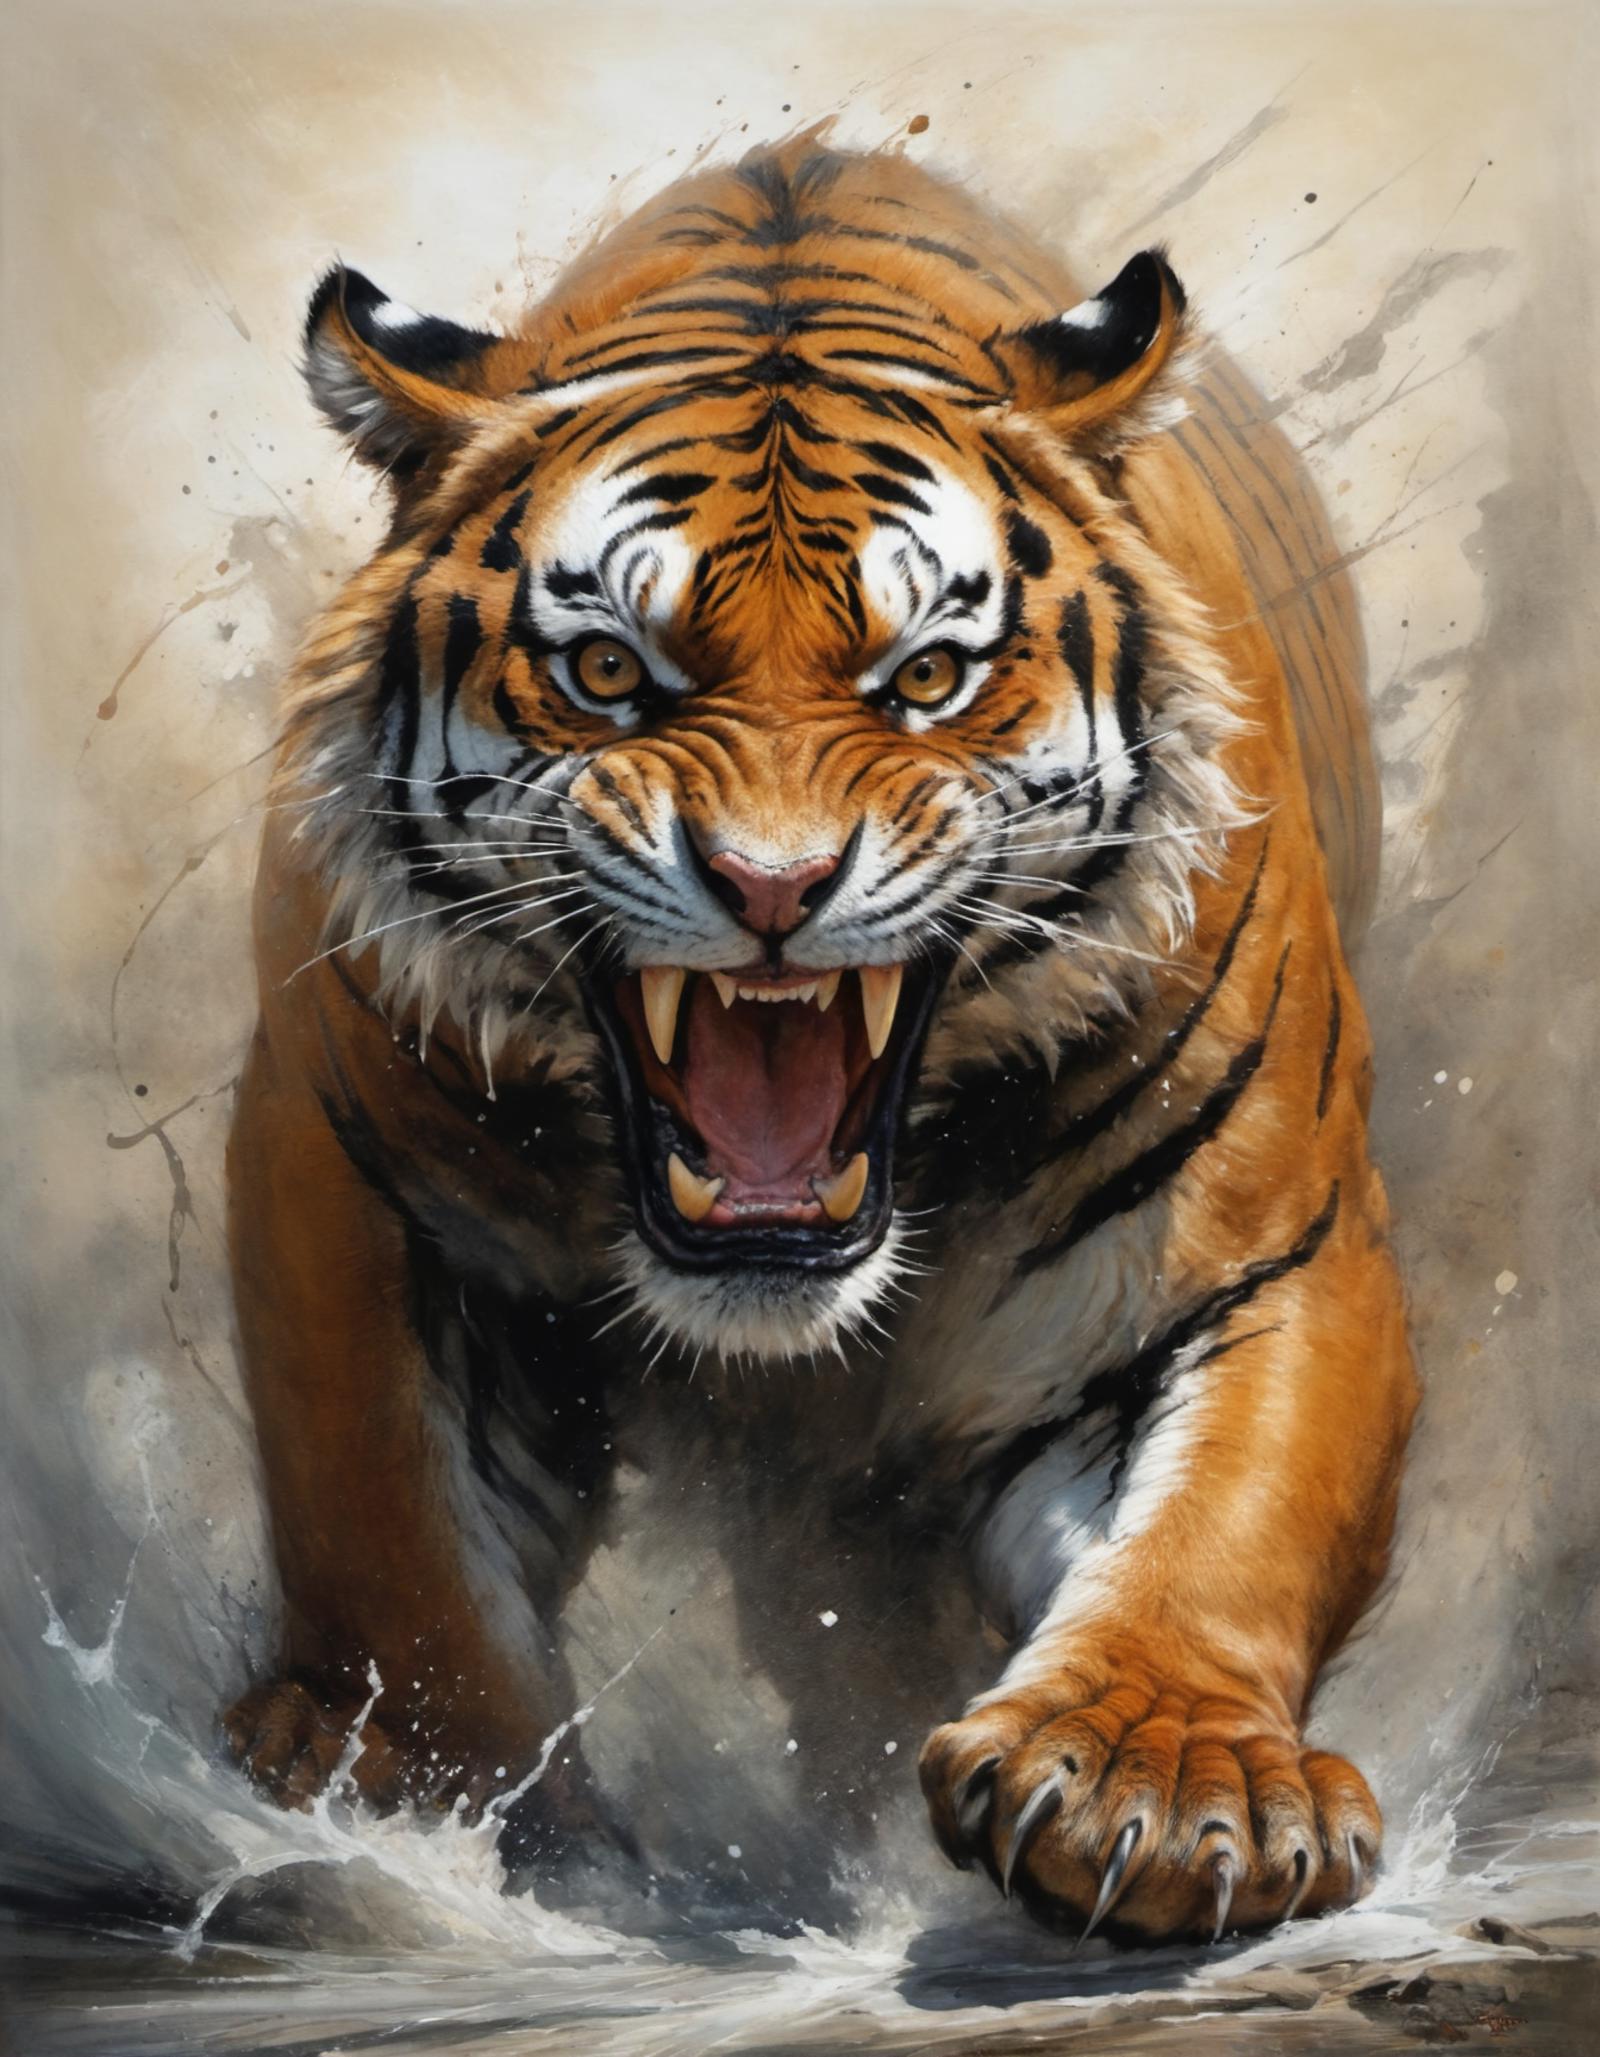 A painting of a tiger with its mouth open and sharp teeth.